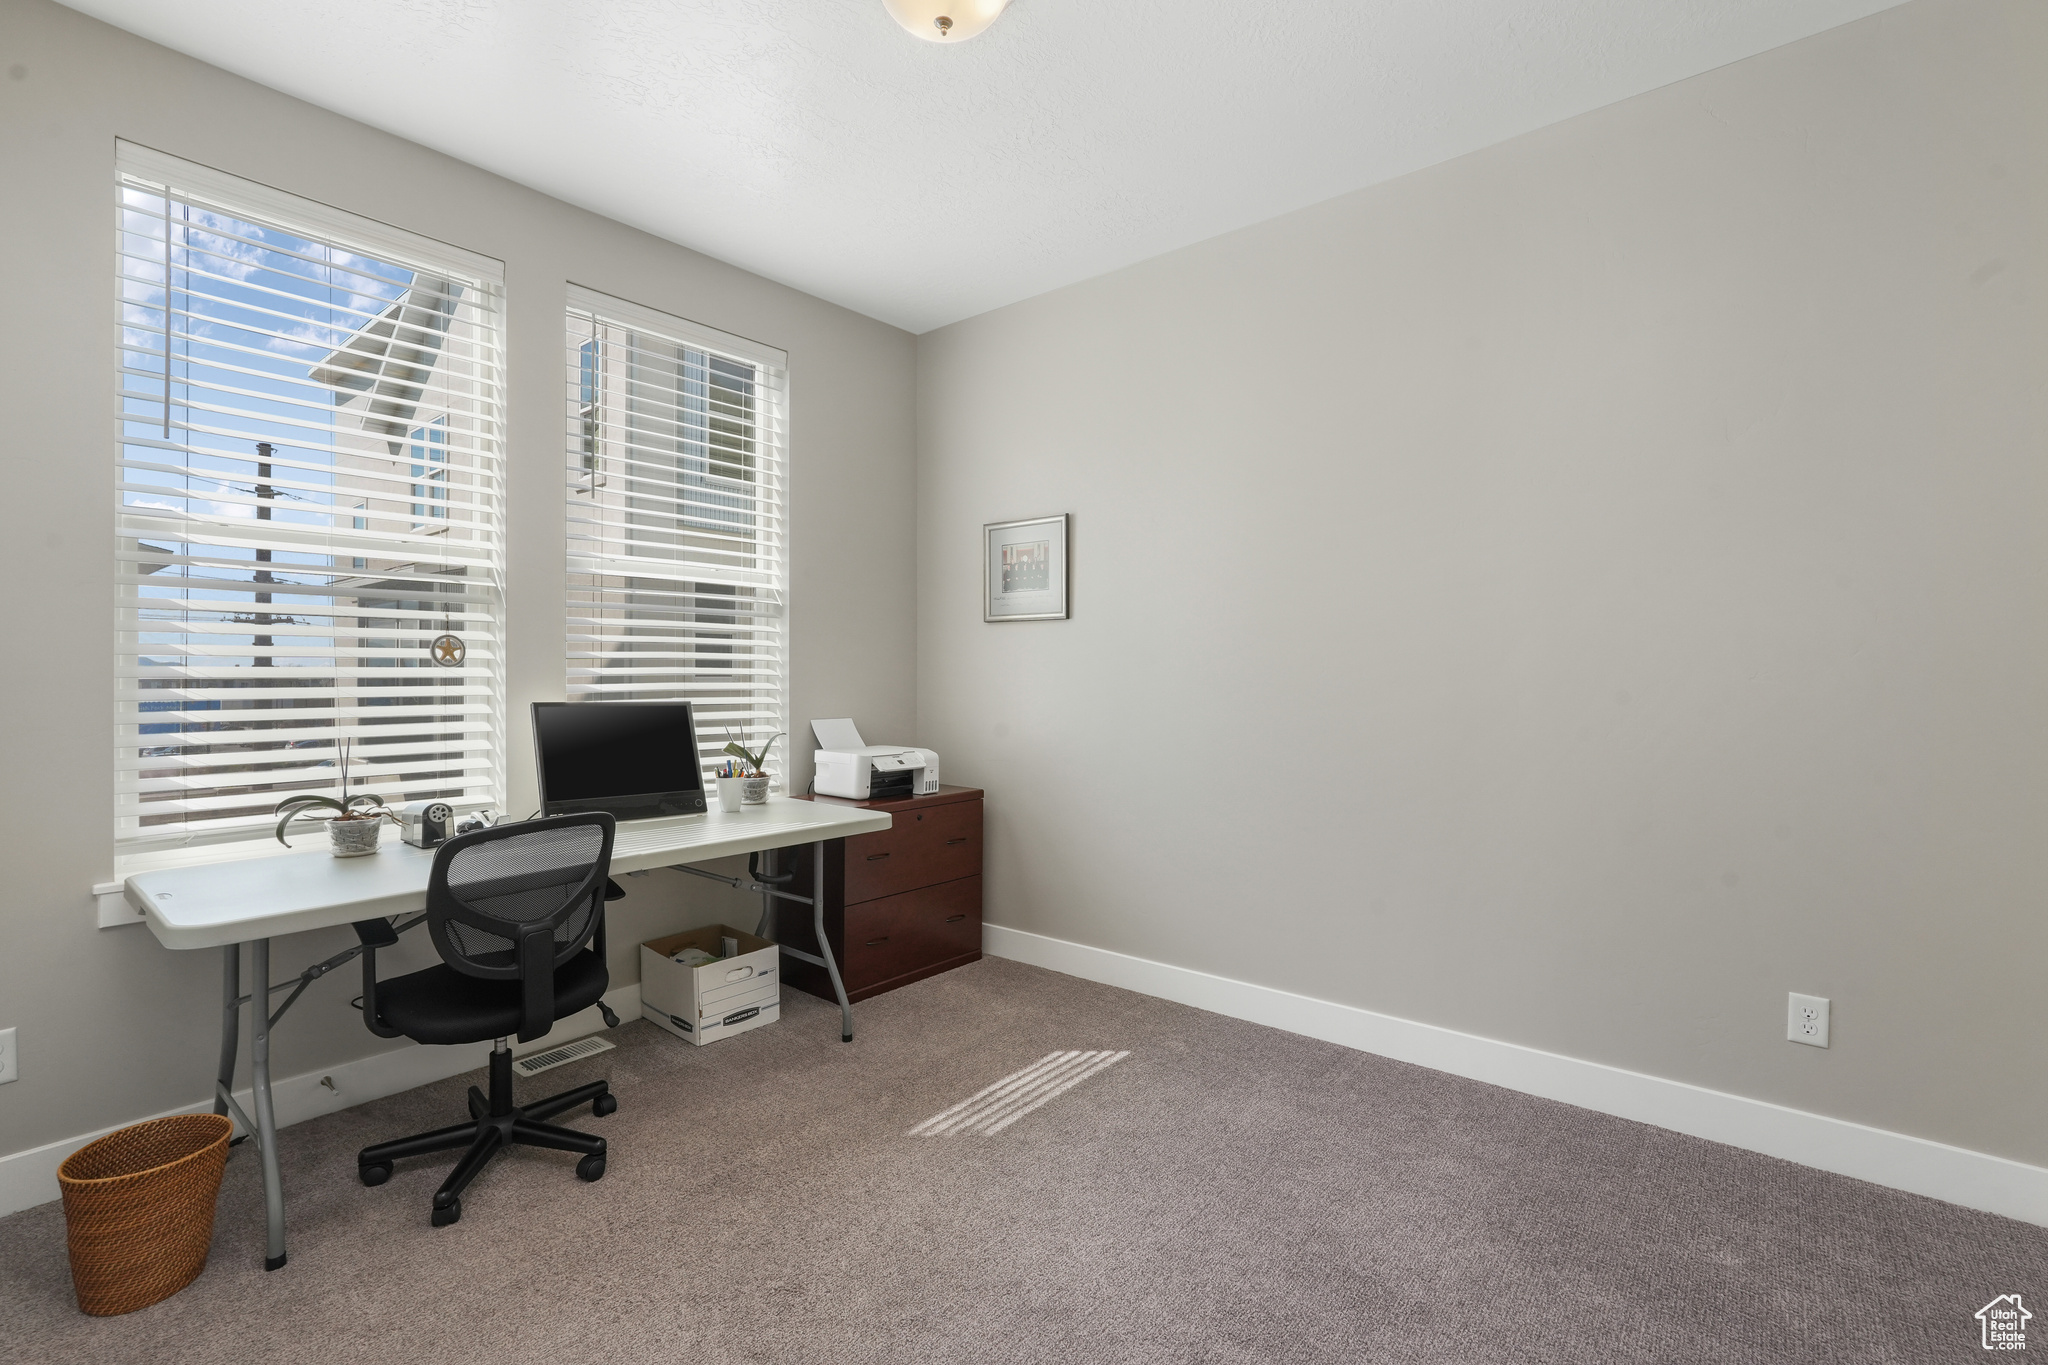 First Bedroom/office across from laundry room (second floor) with large windows